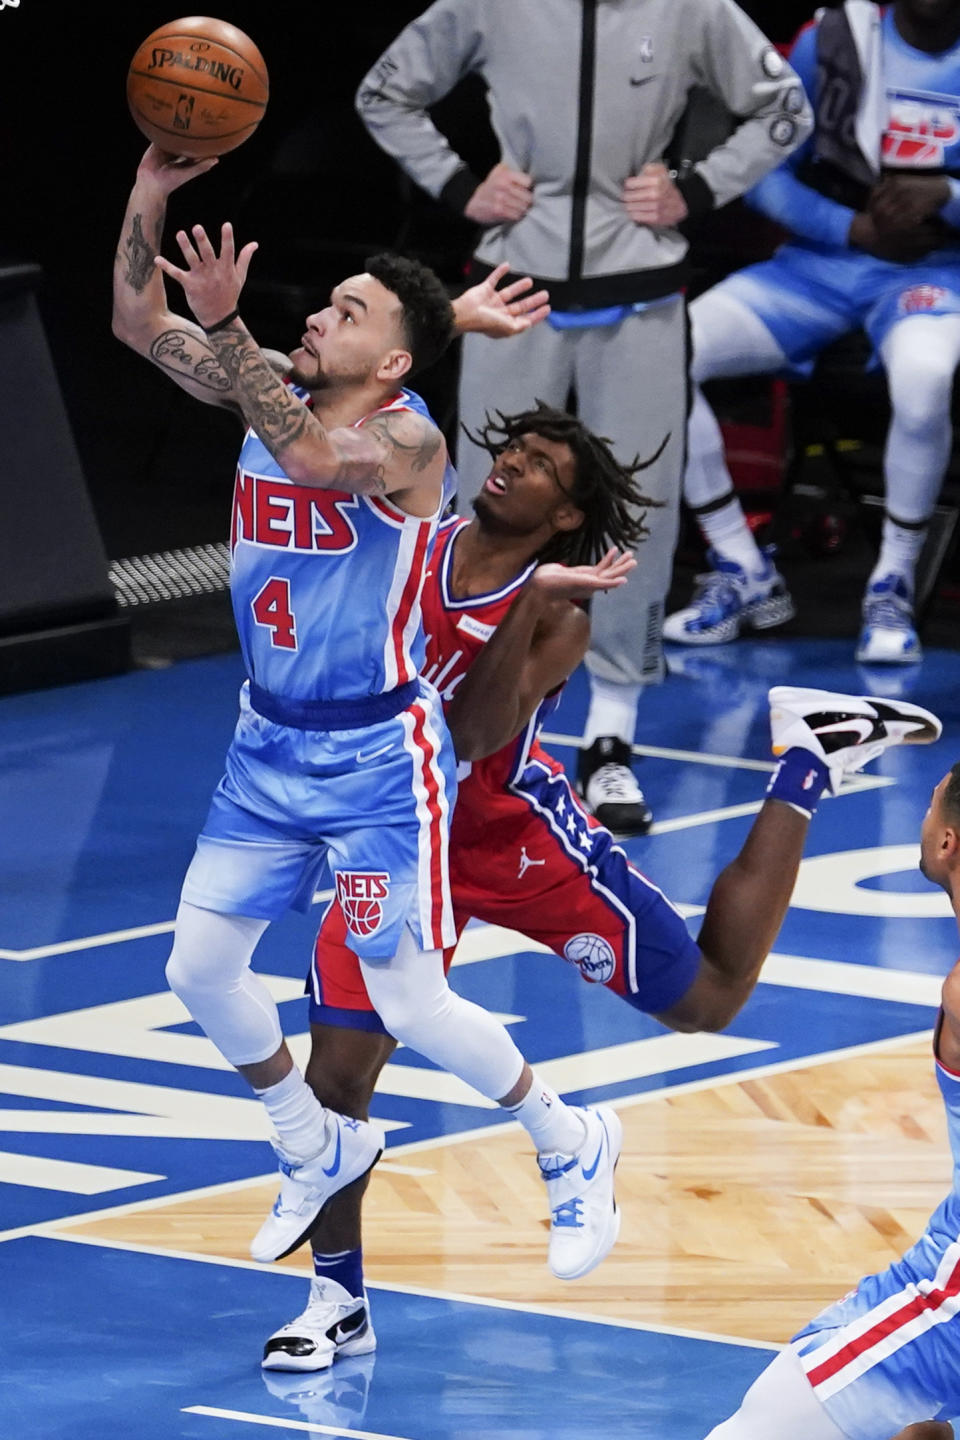 Brooklyn Nets' Chris Chiozza, left, drives past Philadelphia 76ers' Tyrese Maxey during the first half of an NBA basketball game Thursday, Jan. 7, 2021, in New York. (AP Photo/Frank Franklin II)